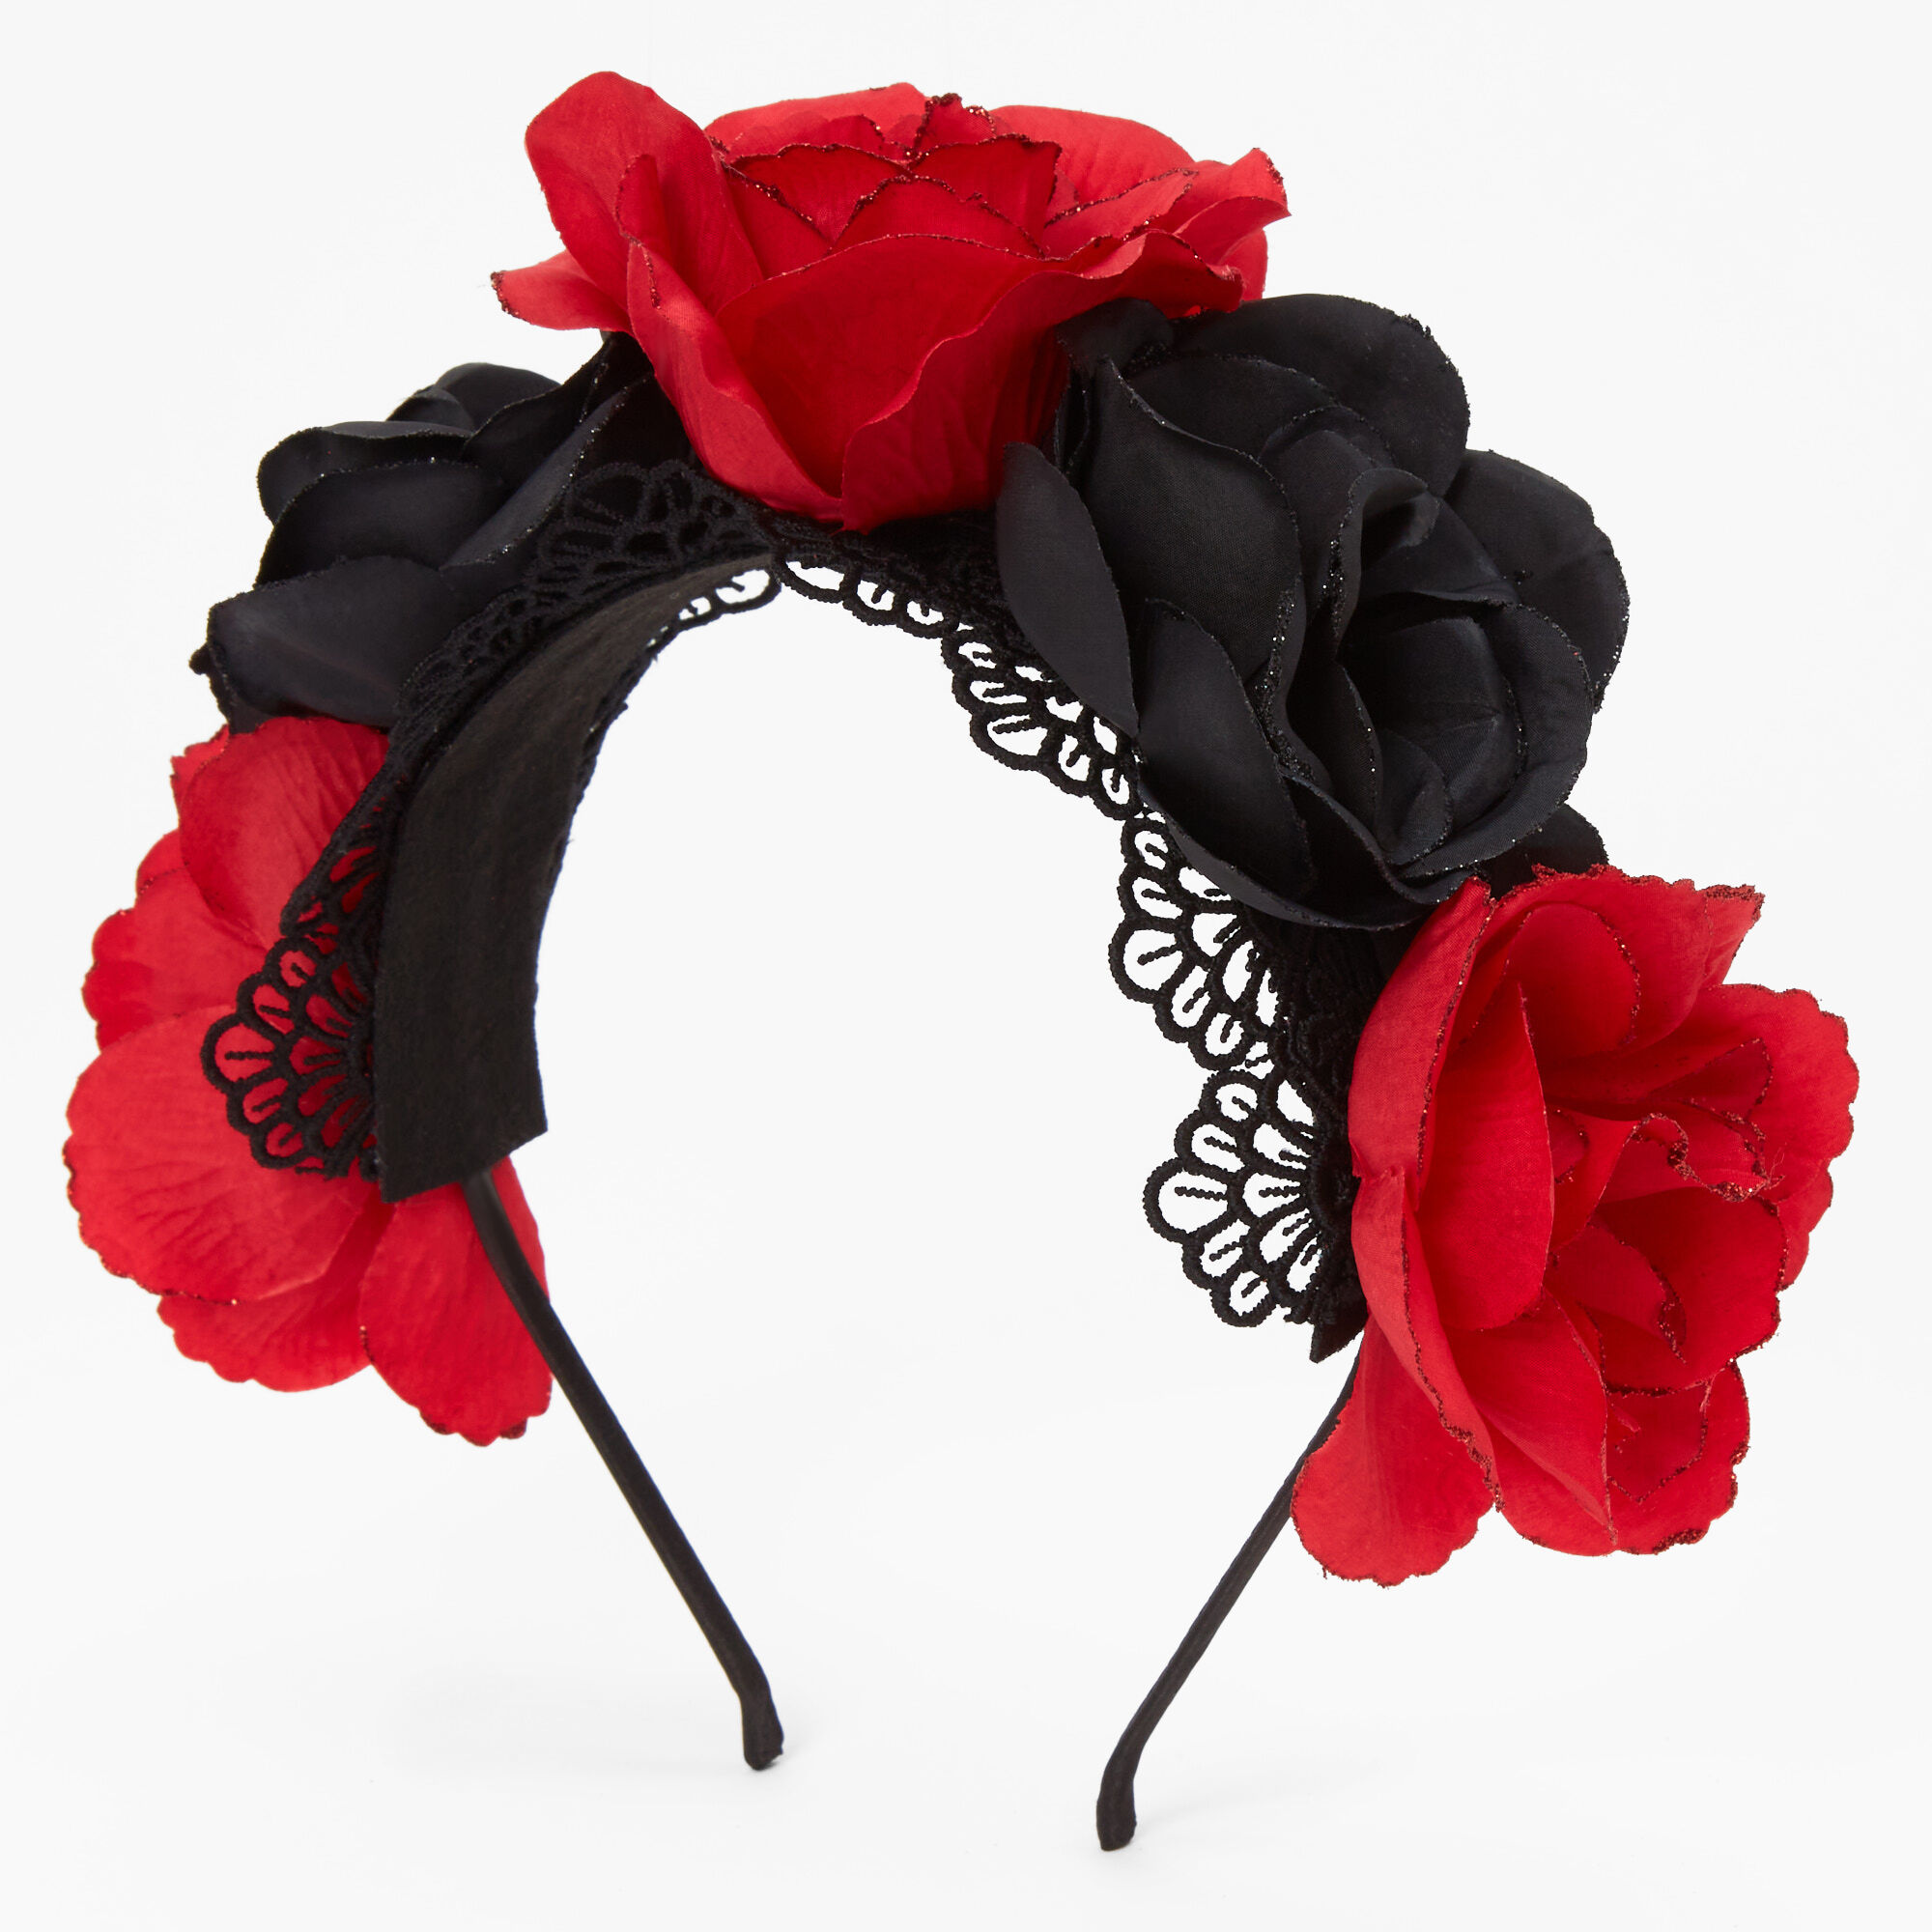 View Claires Day Of The Dead Flower Crown Headband Red information